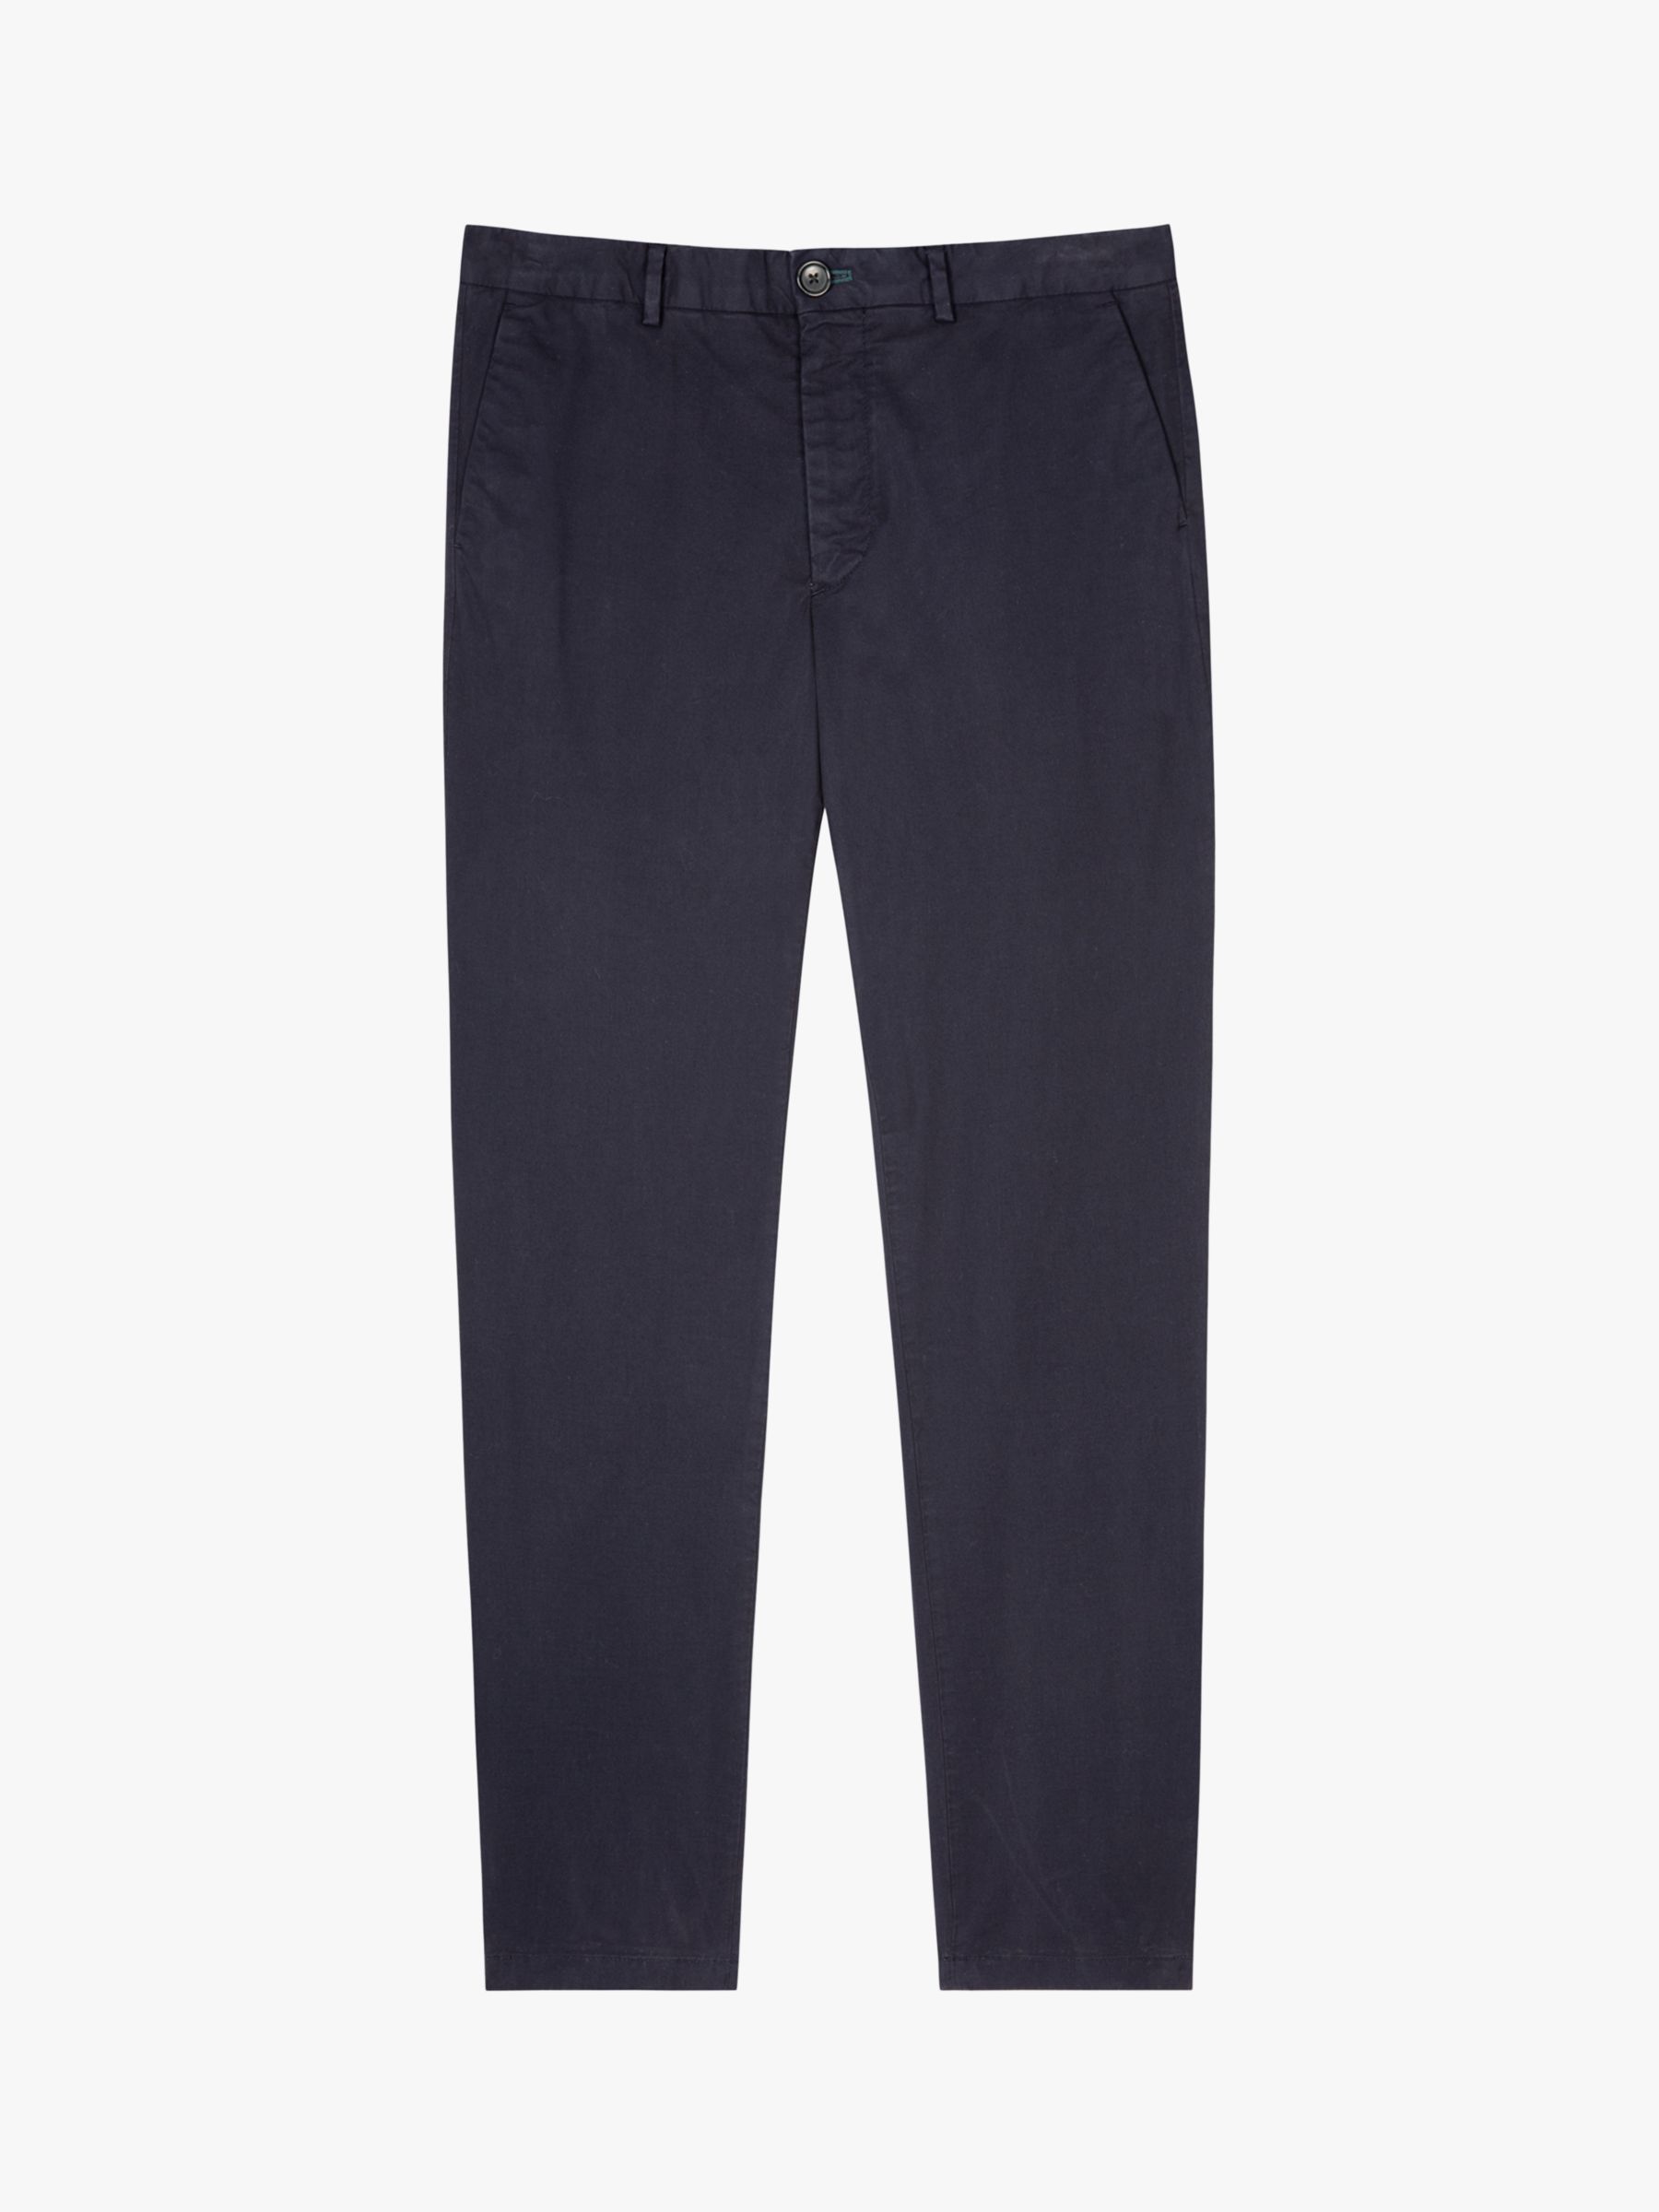 Paul Smith Mid Clean Chinos, Blue, 38R